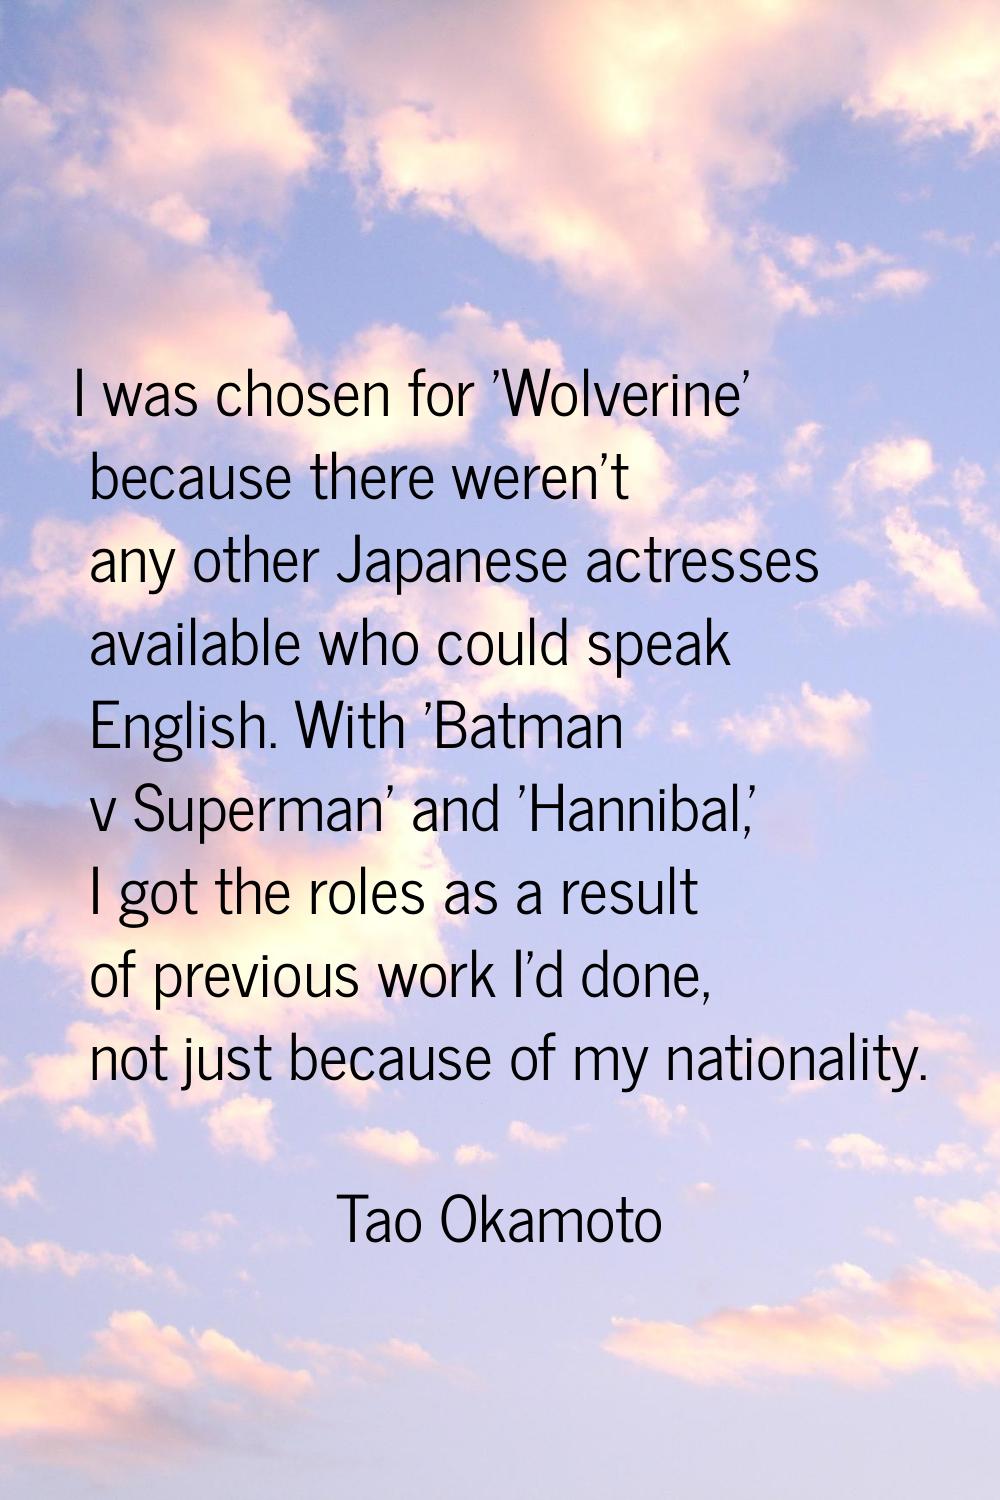 I was chosen for 'Wolverine' because there weren't any other Japanese actresses available who could